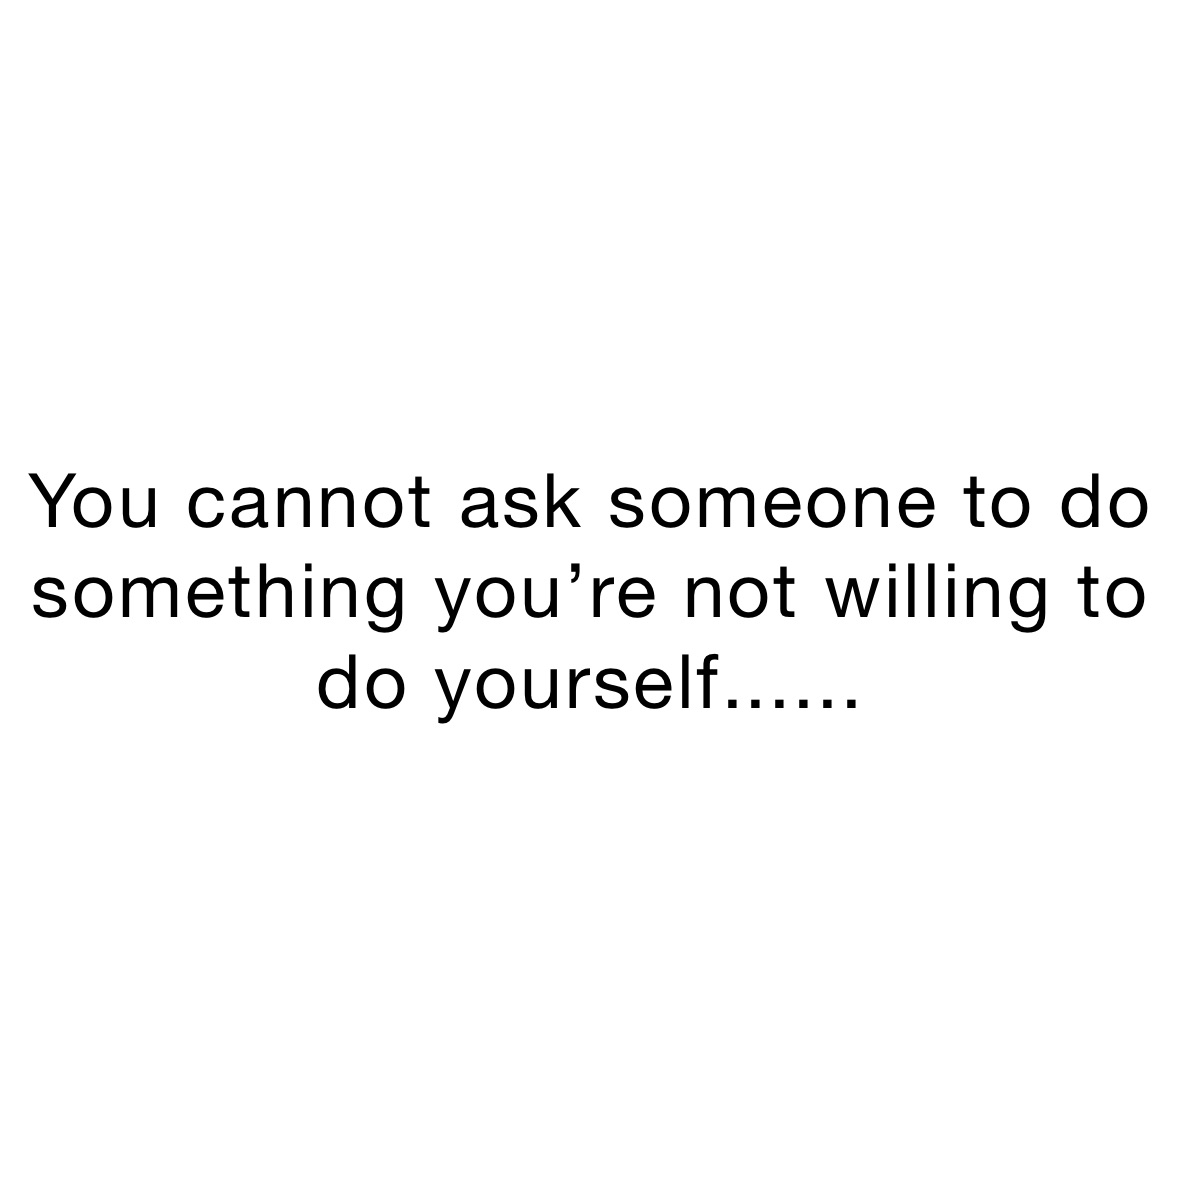 You cannot ask someone to do something you’re not willing to do yourself...... You can’t ask something of someone that you’re not willing to do yourself........